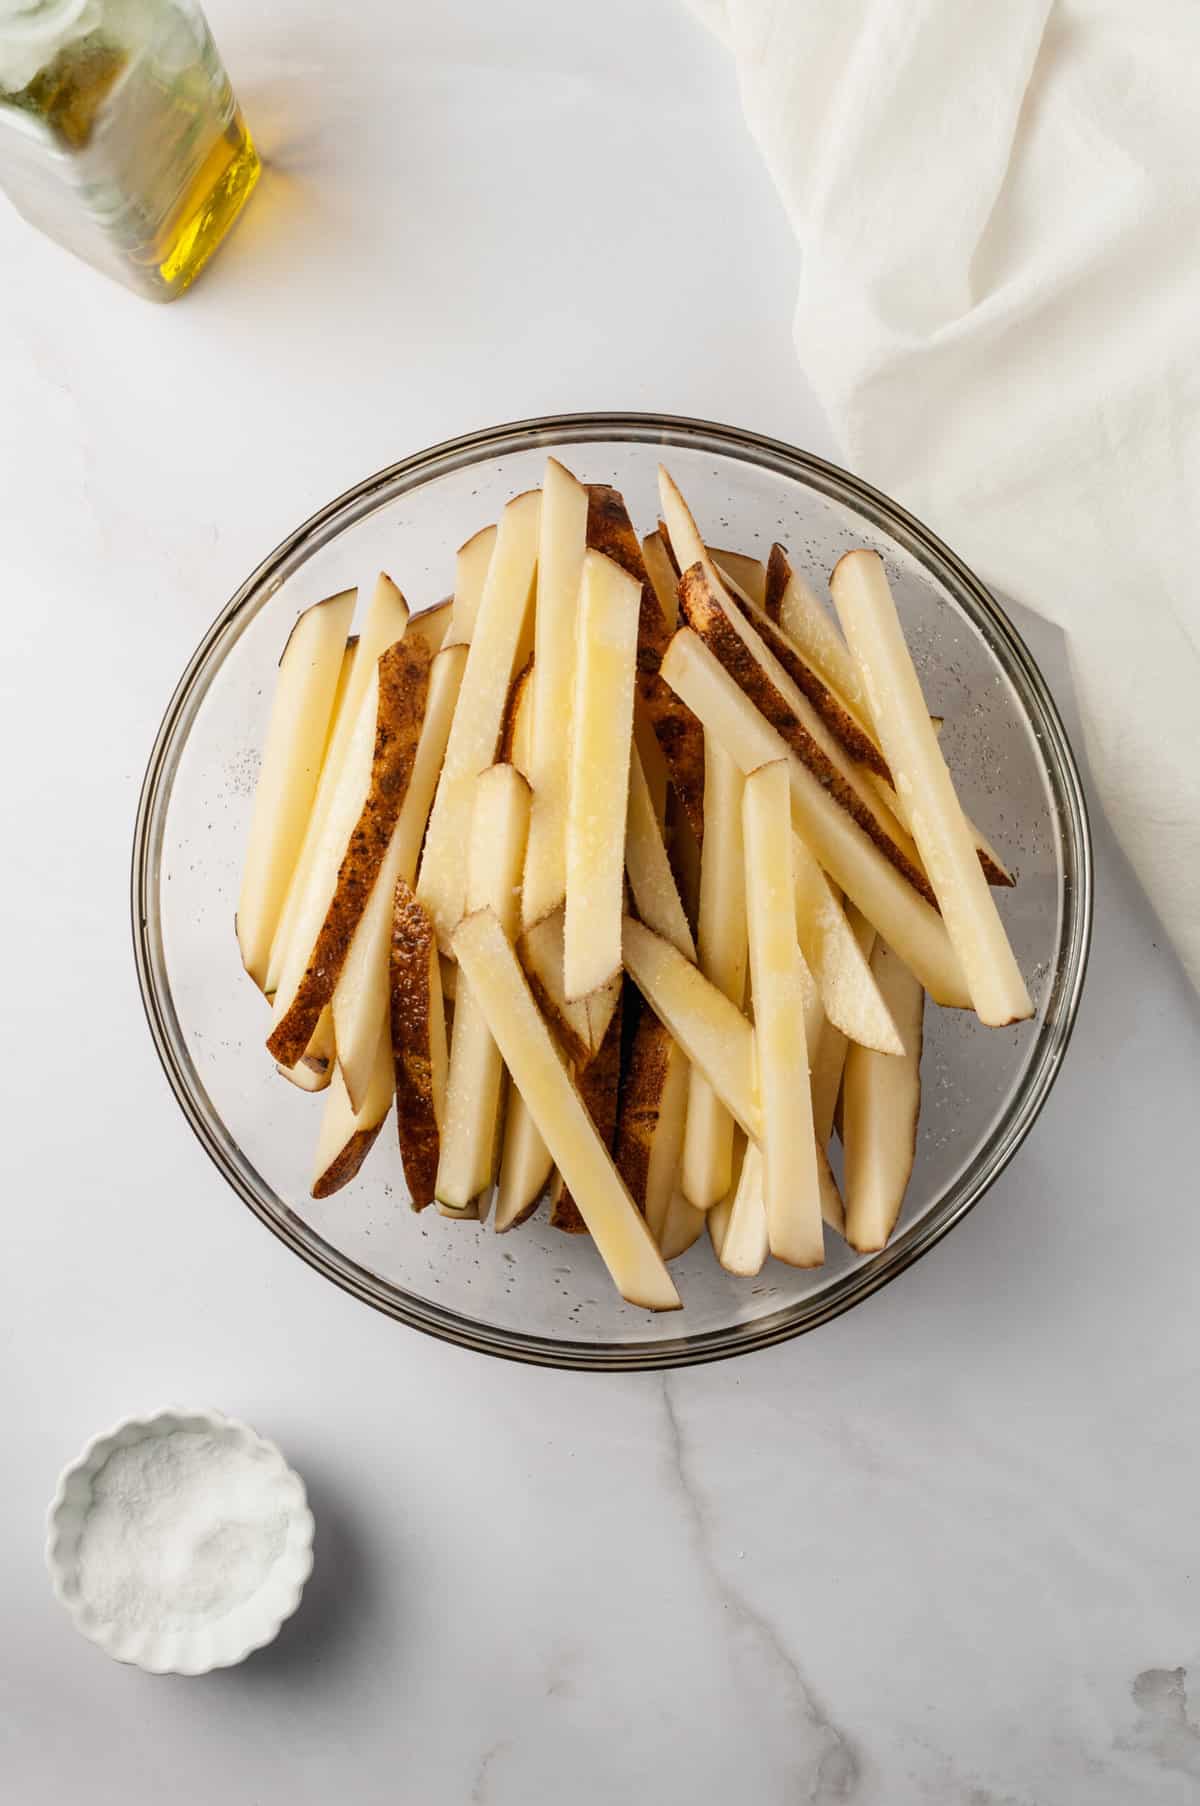 Fries in glass bowl before baking